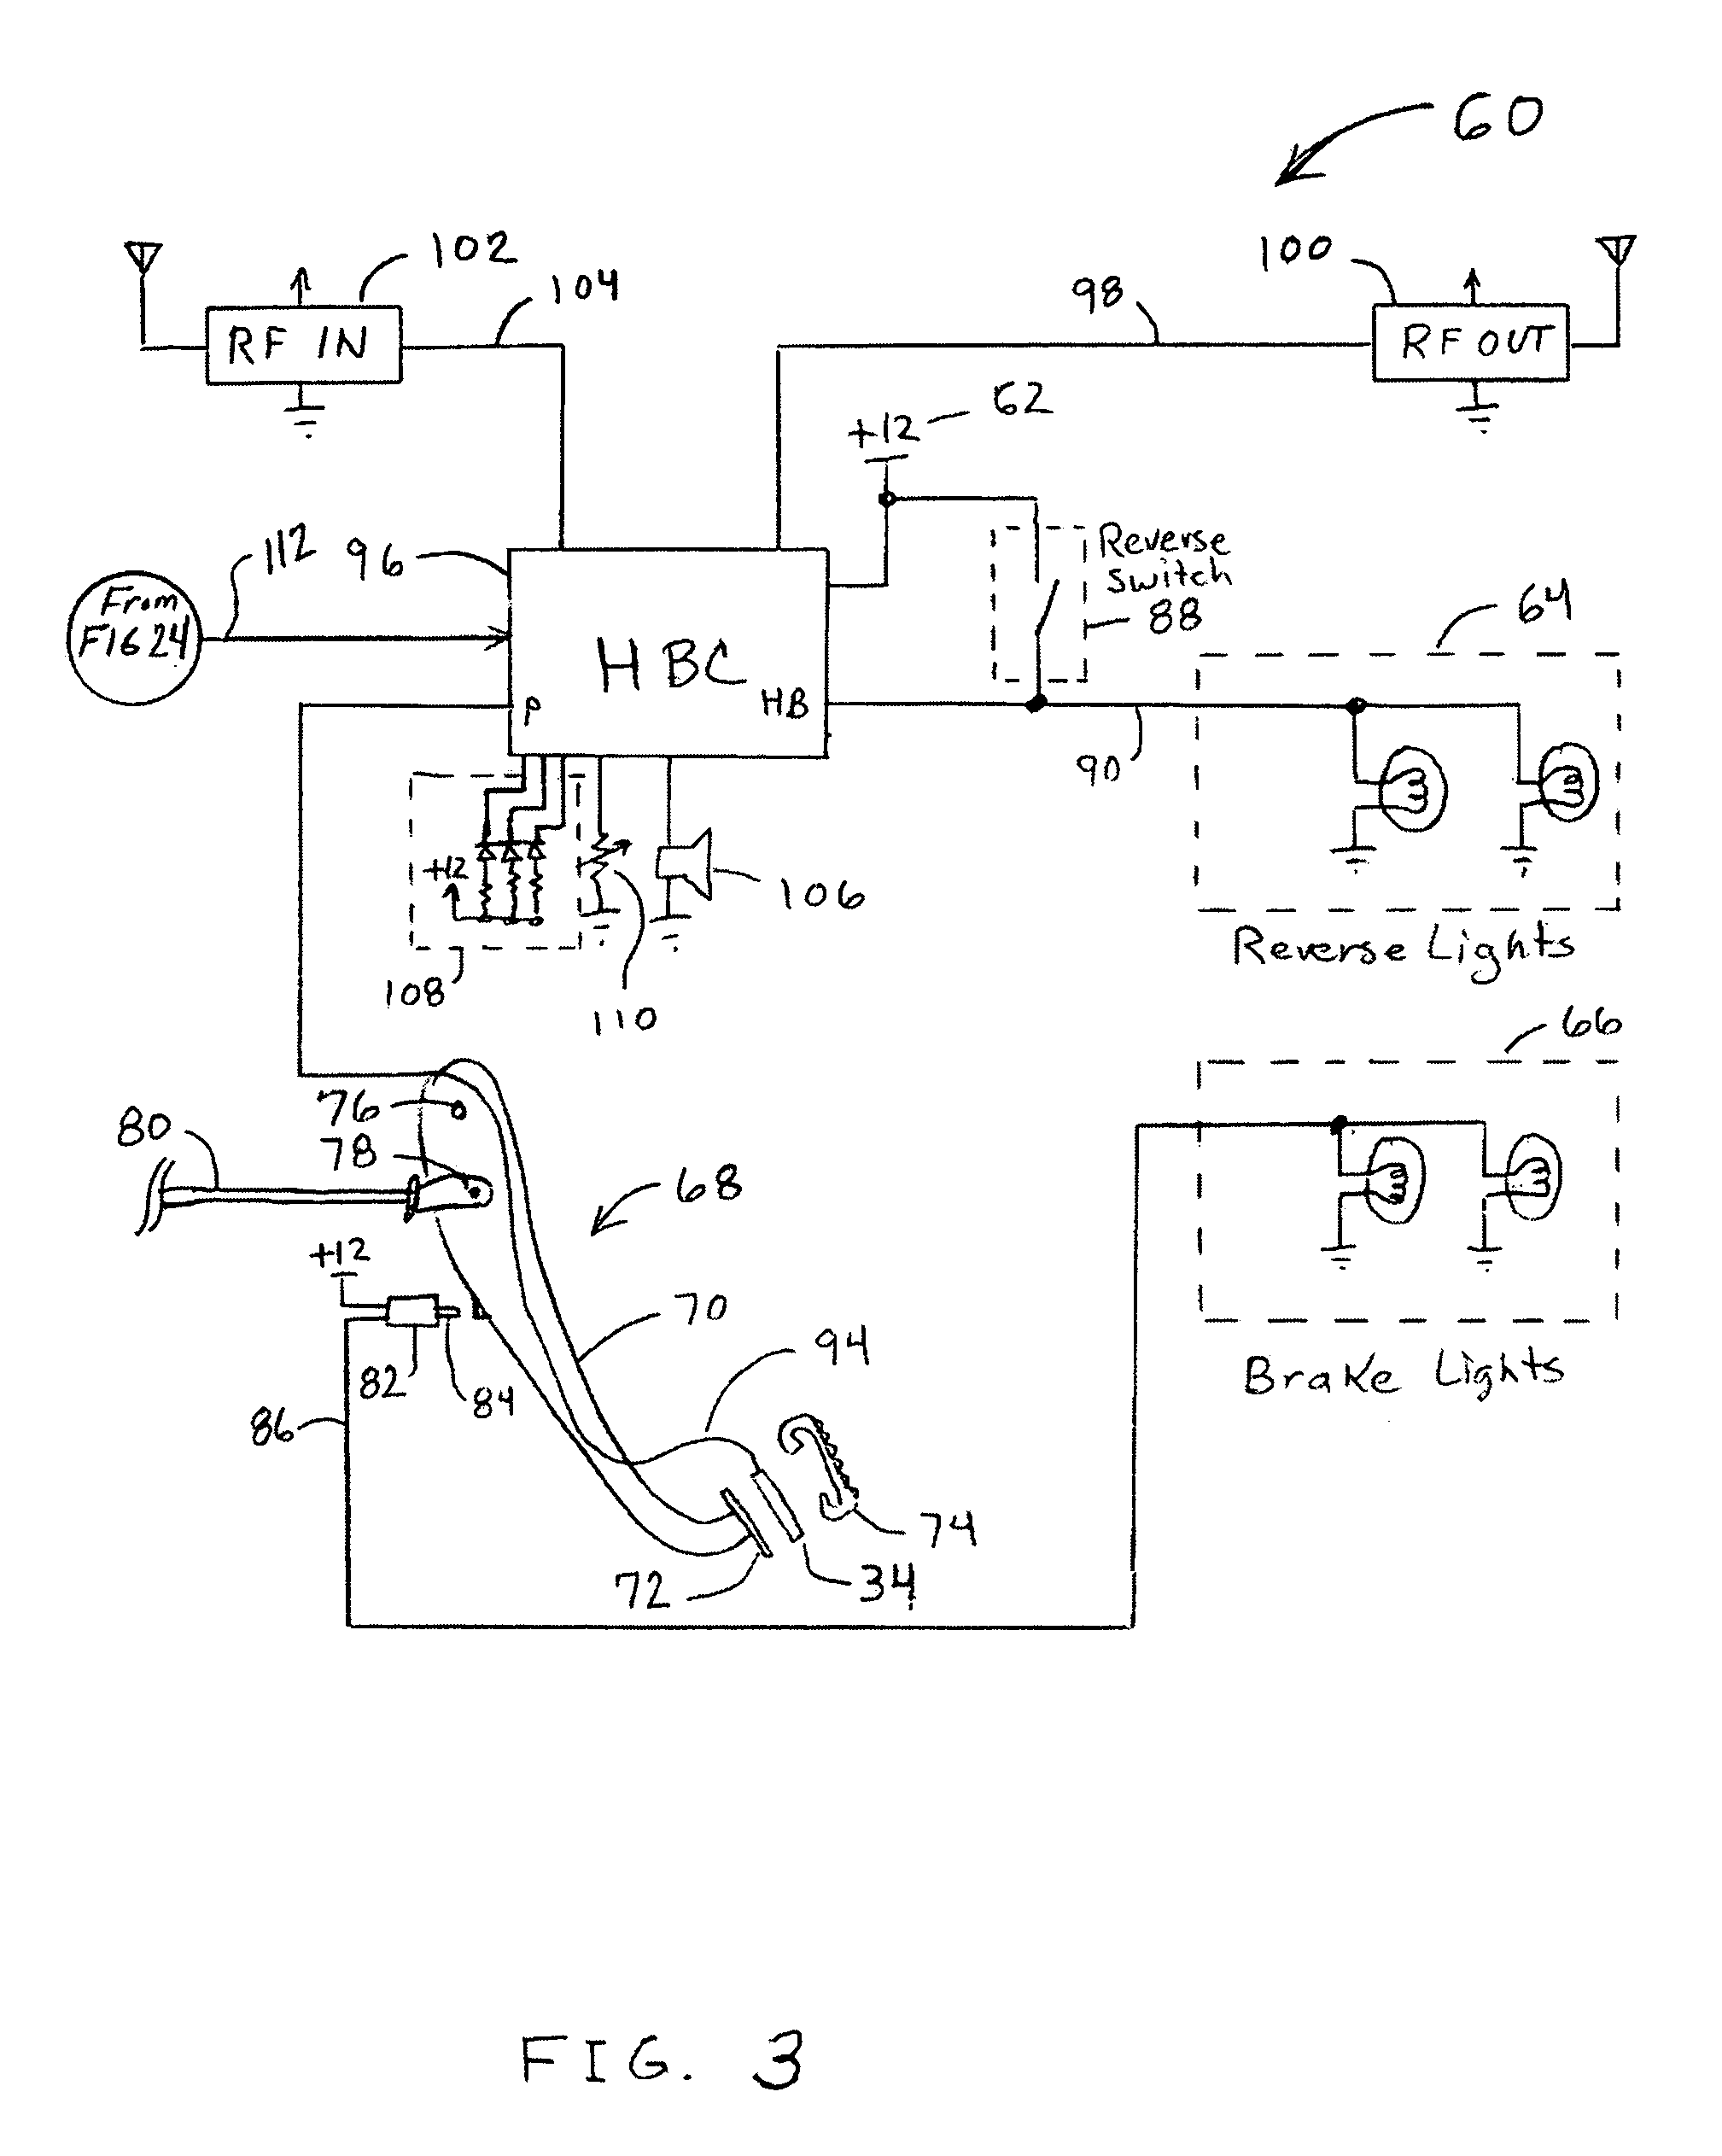 Reaction advantage anti-collision systems and methods